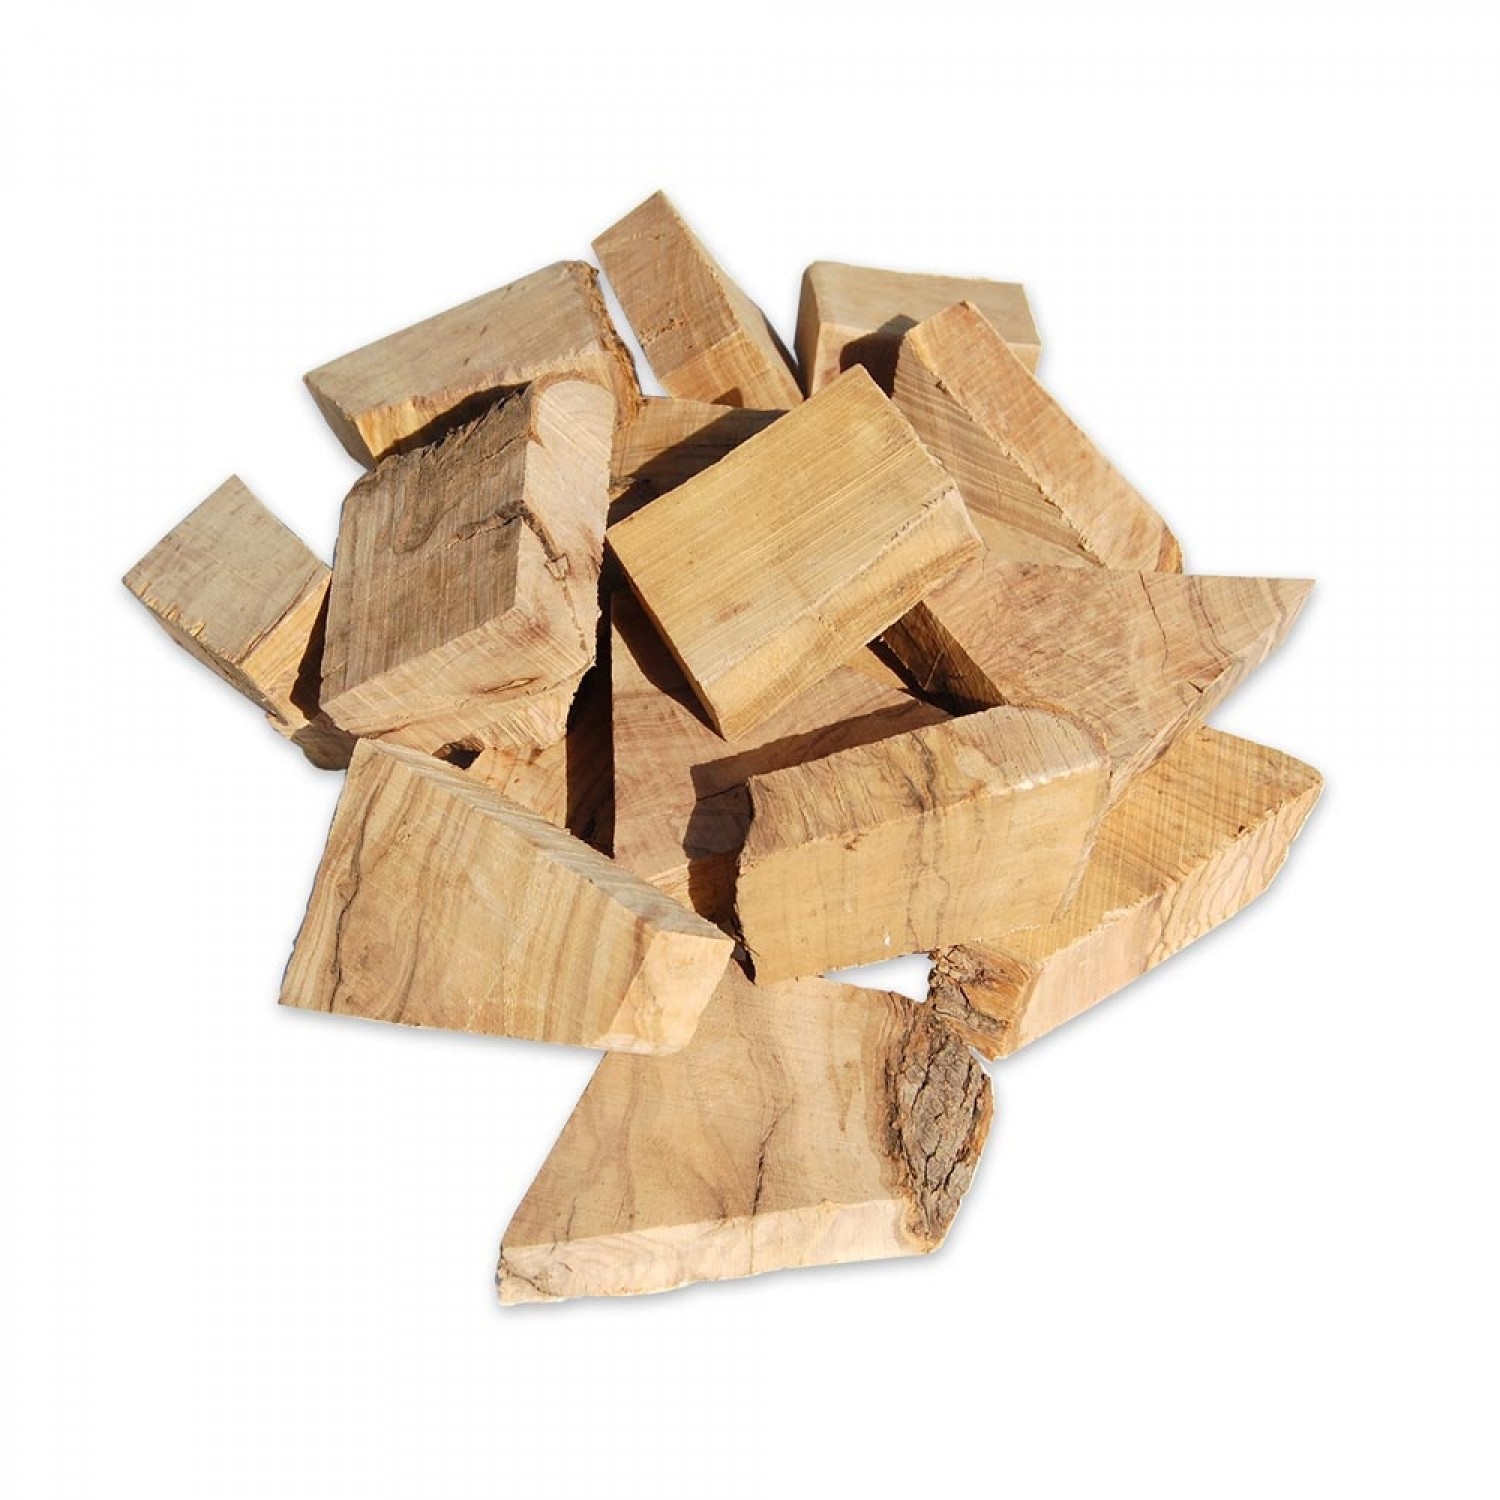 Raw Olive Wood for DIY Projects, 1 kg » D.O.M.